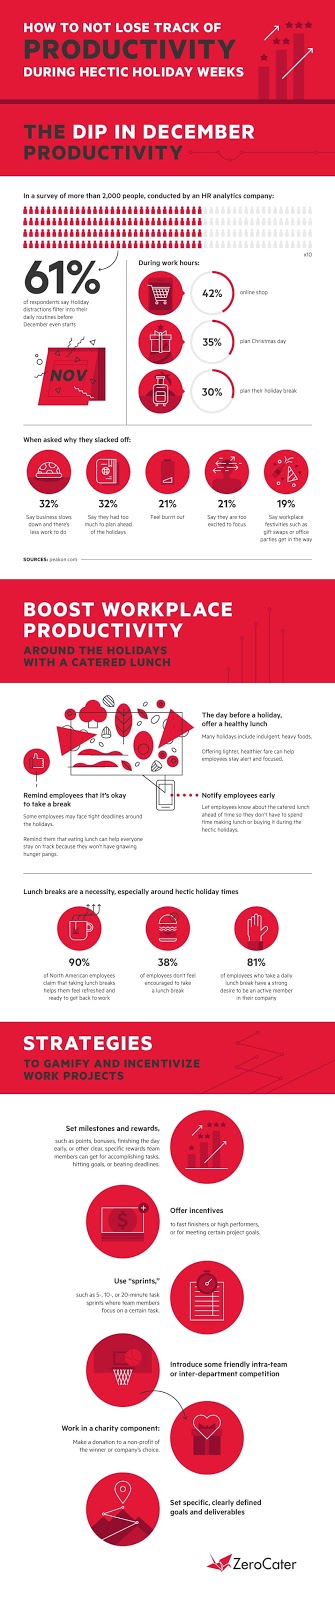 How to Not Lose Track of Productivity During Hectic Holiday Weeks #infographic